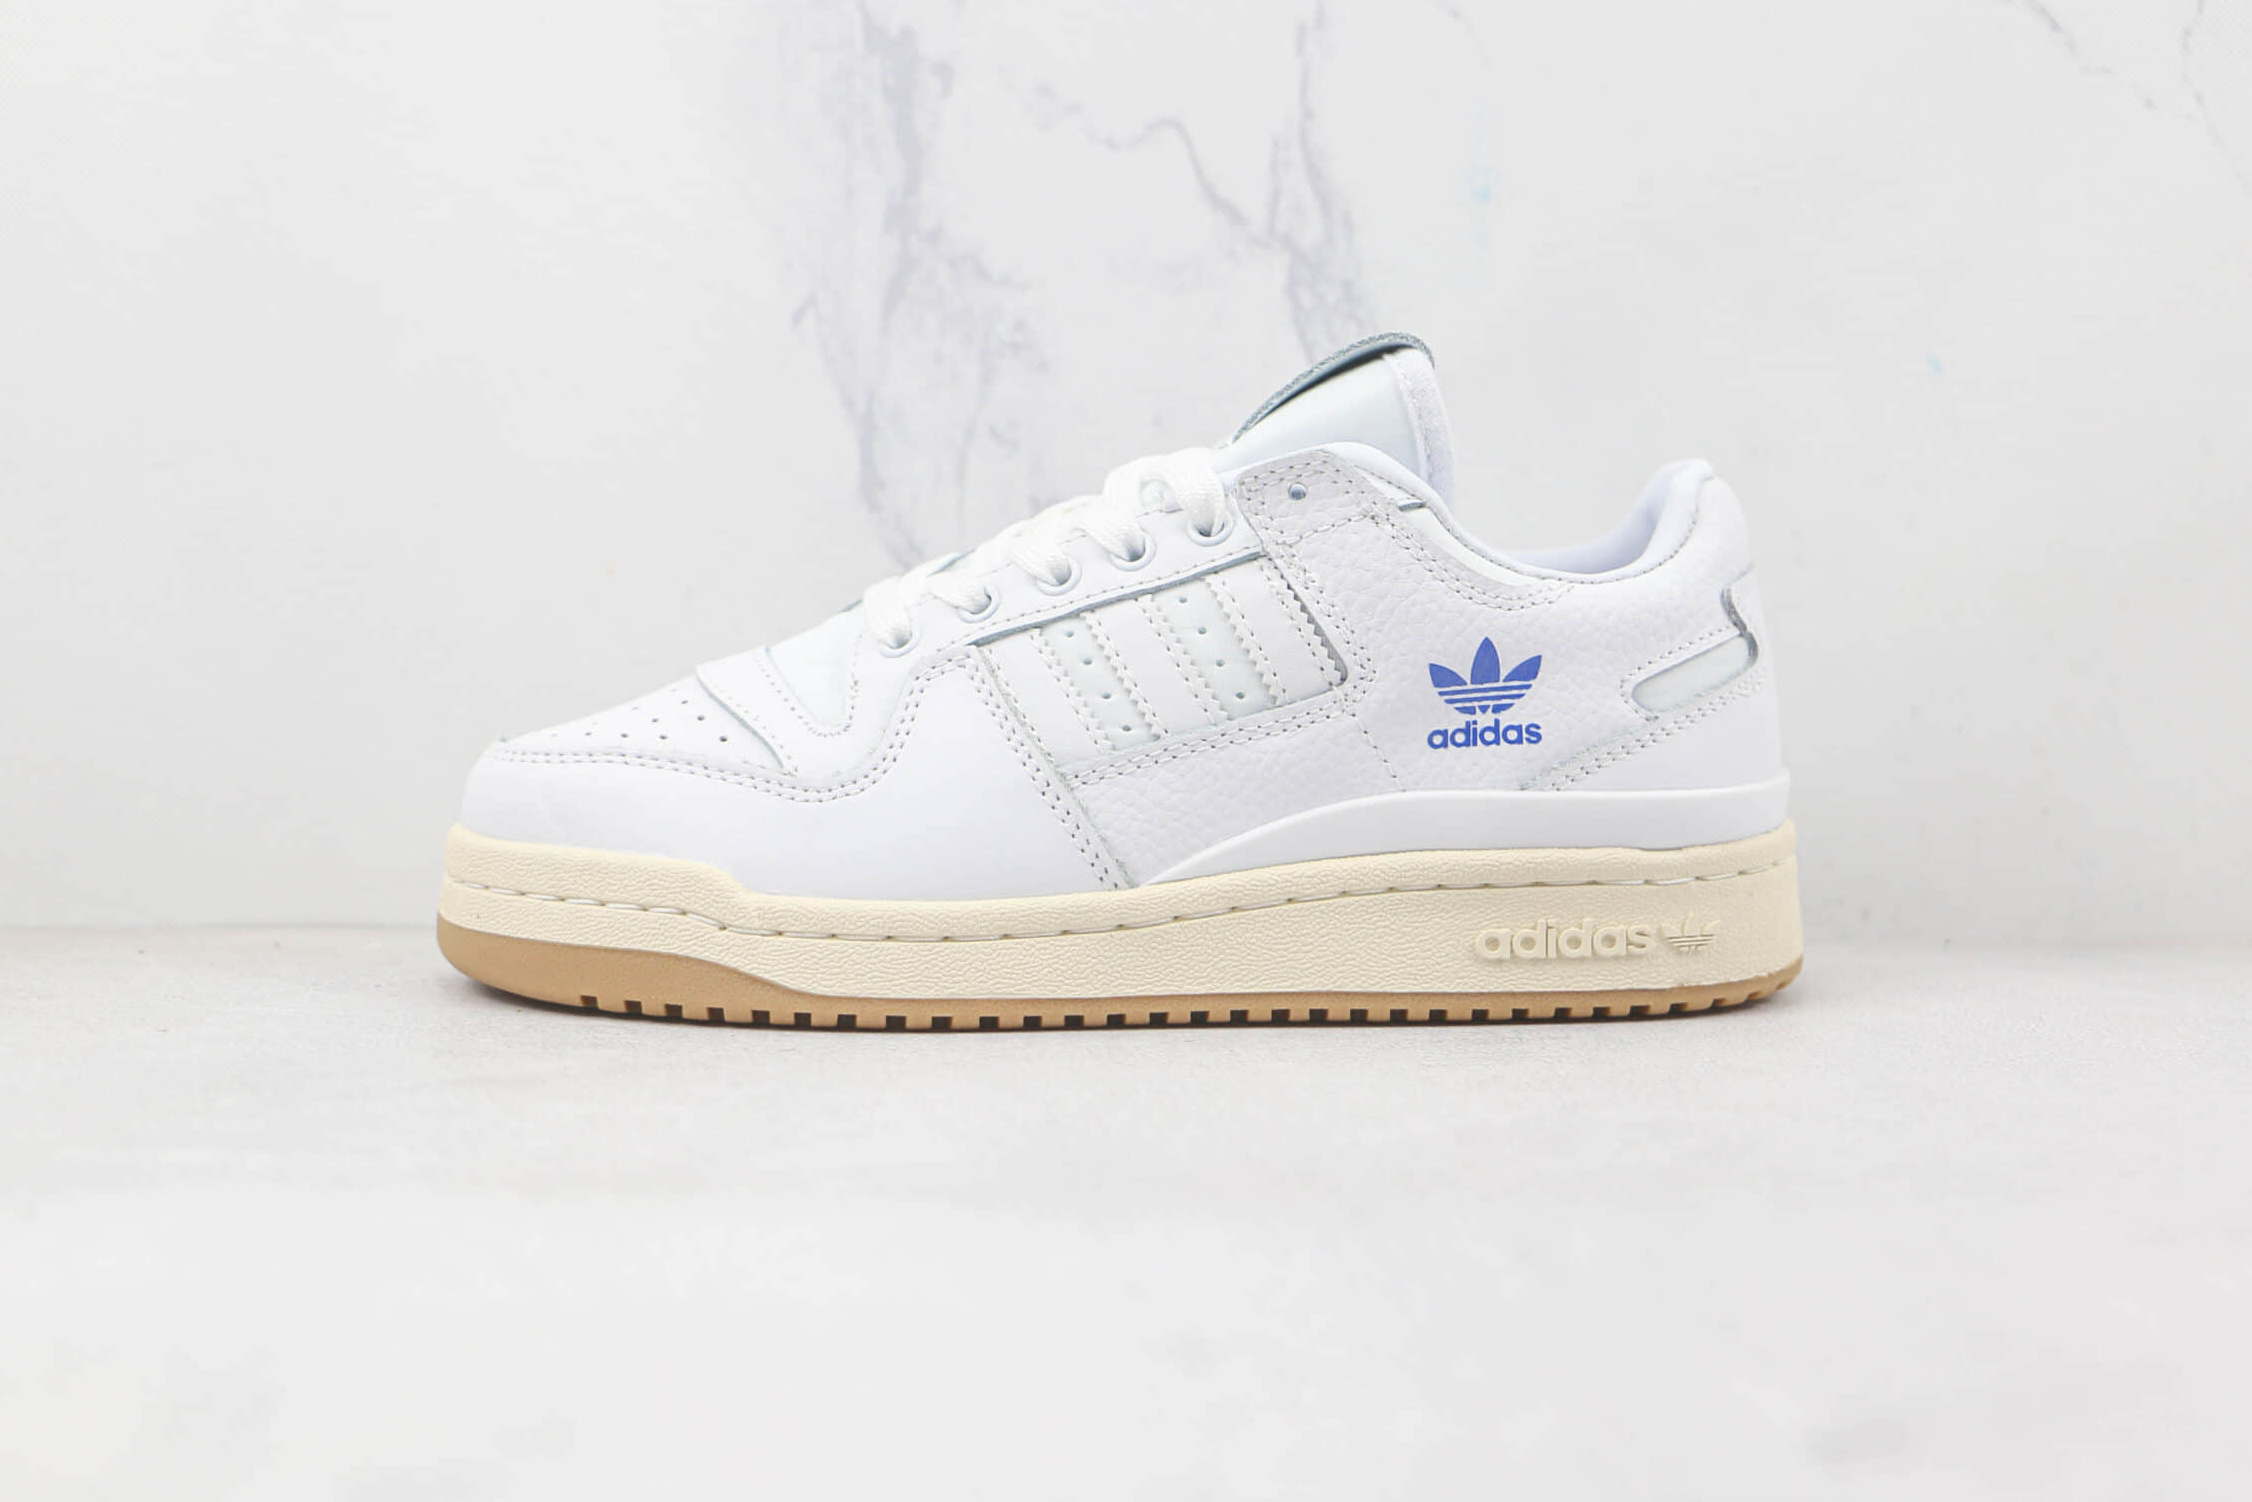 Adidas Forum 84 'White Blue Bird' H04903 - Classic Sneakers with a Modern Twist